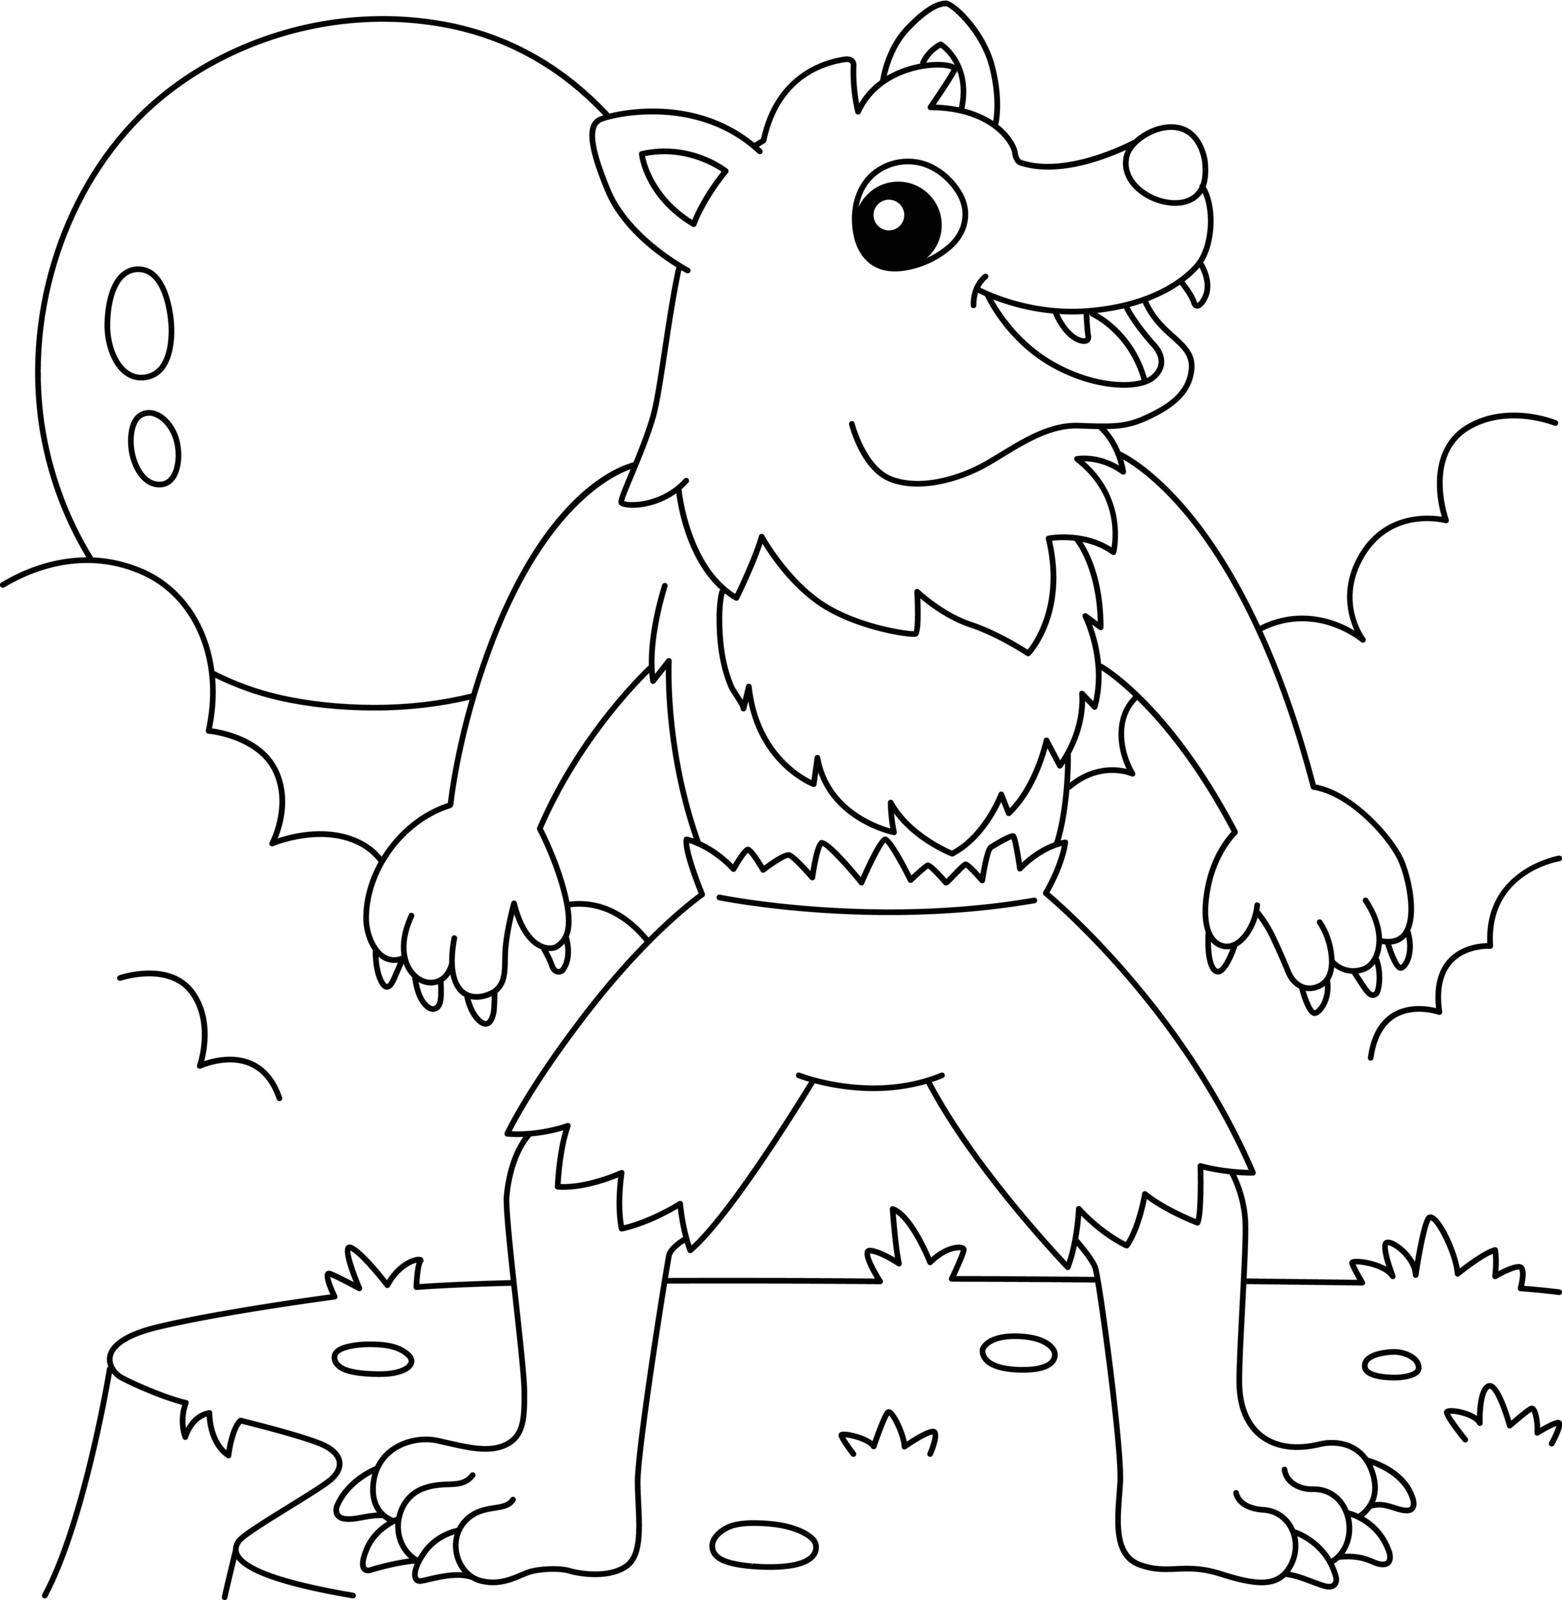 A cute and funny coloring page of a werewolf halloween. Provides hours of coloring fun for children. To color, this page is very easy. Suitable for little kids and toddlers.